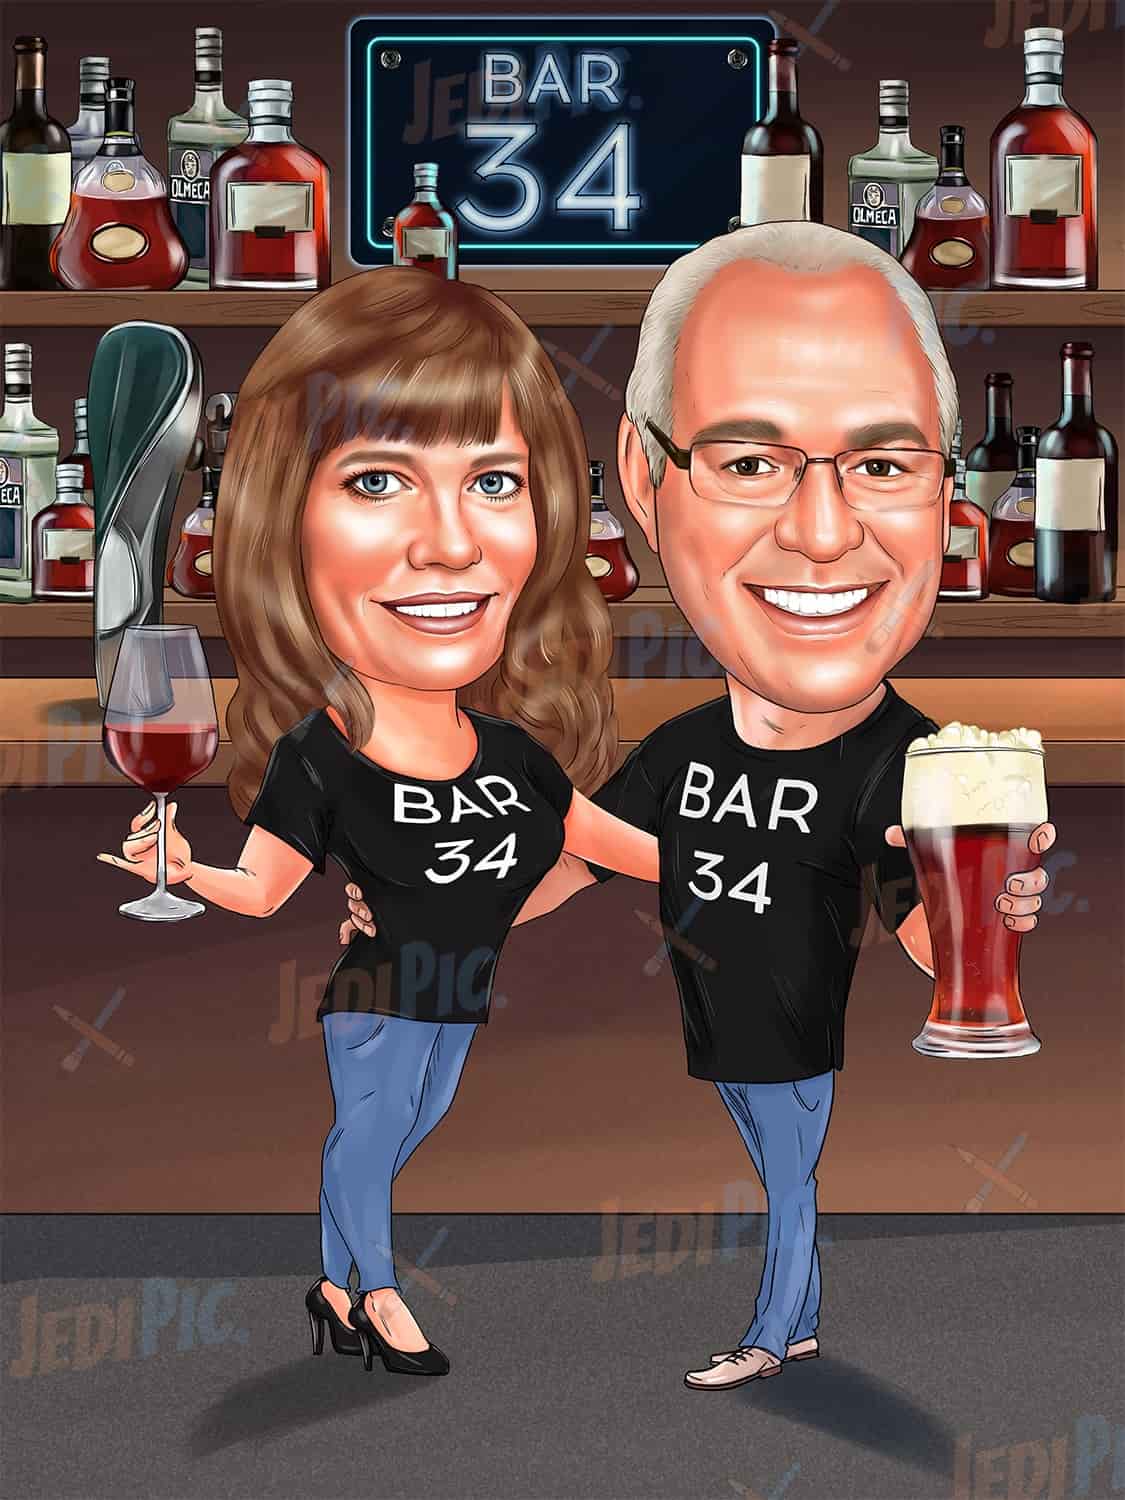 Couple Caricature Cheering in Bar